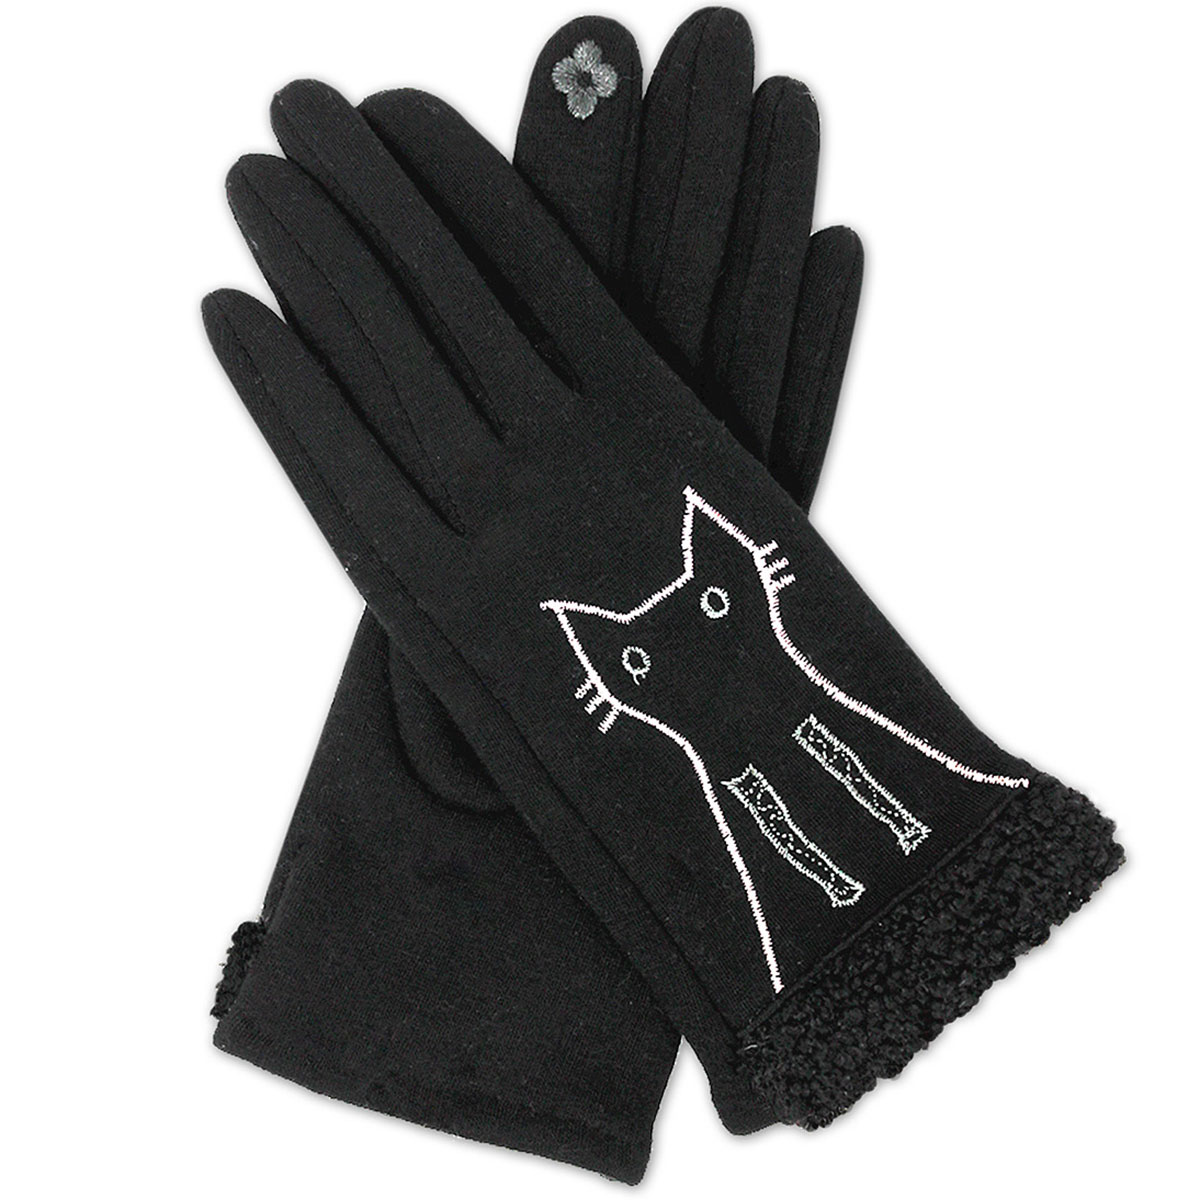 1224 - Black Cat Silhouette<br>
Touch Screen Smart Gloves